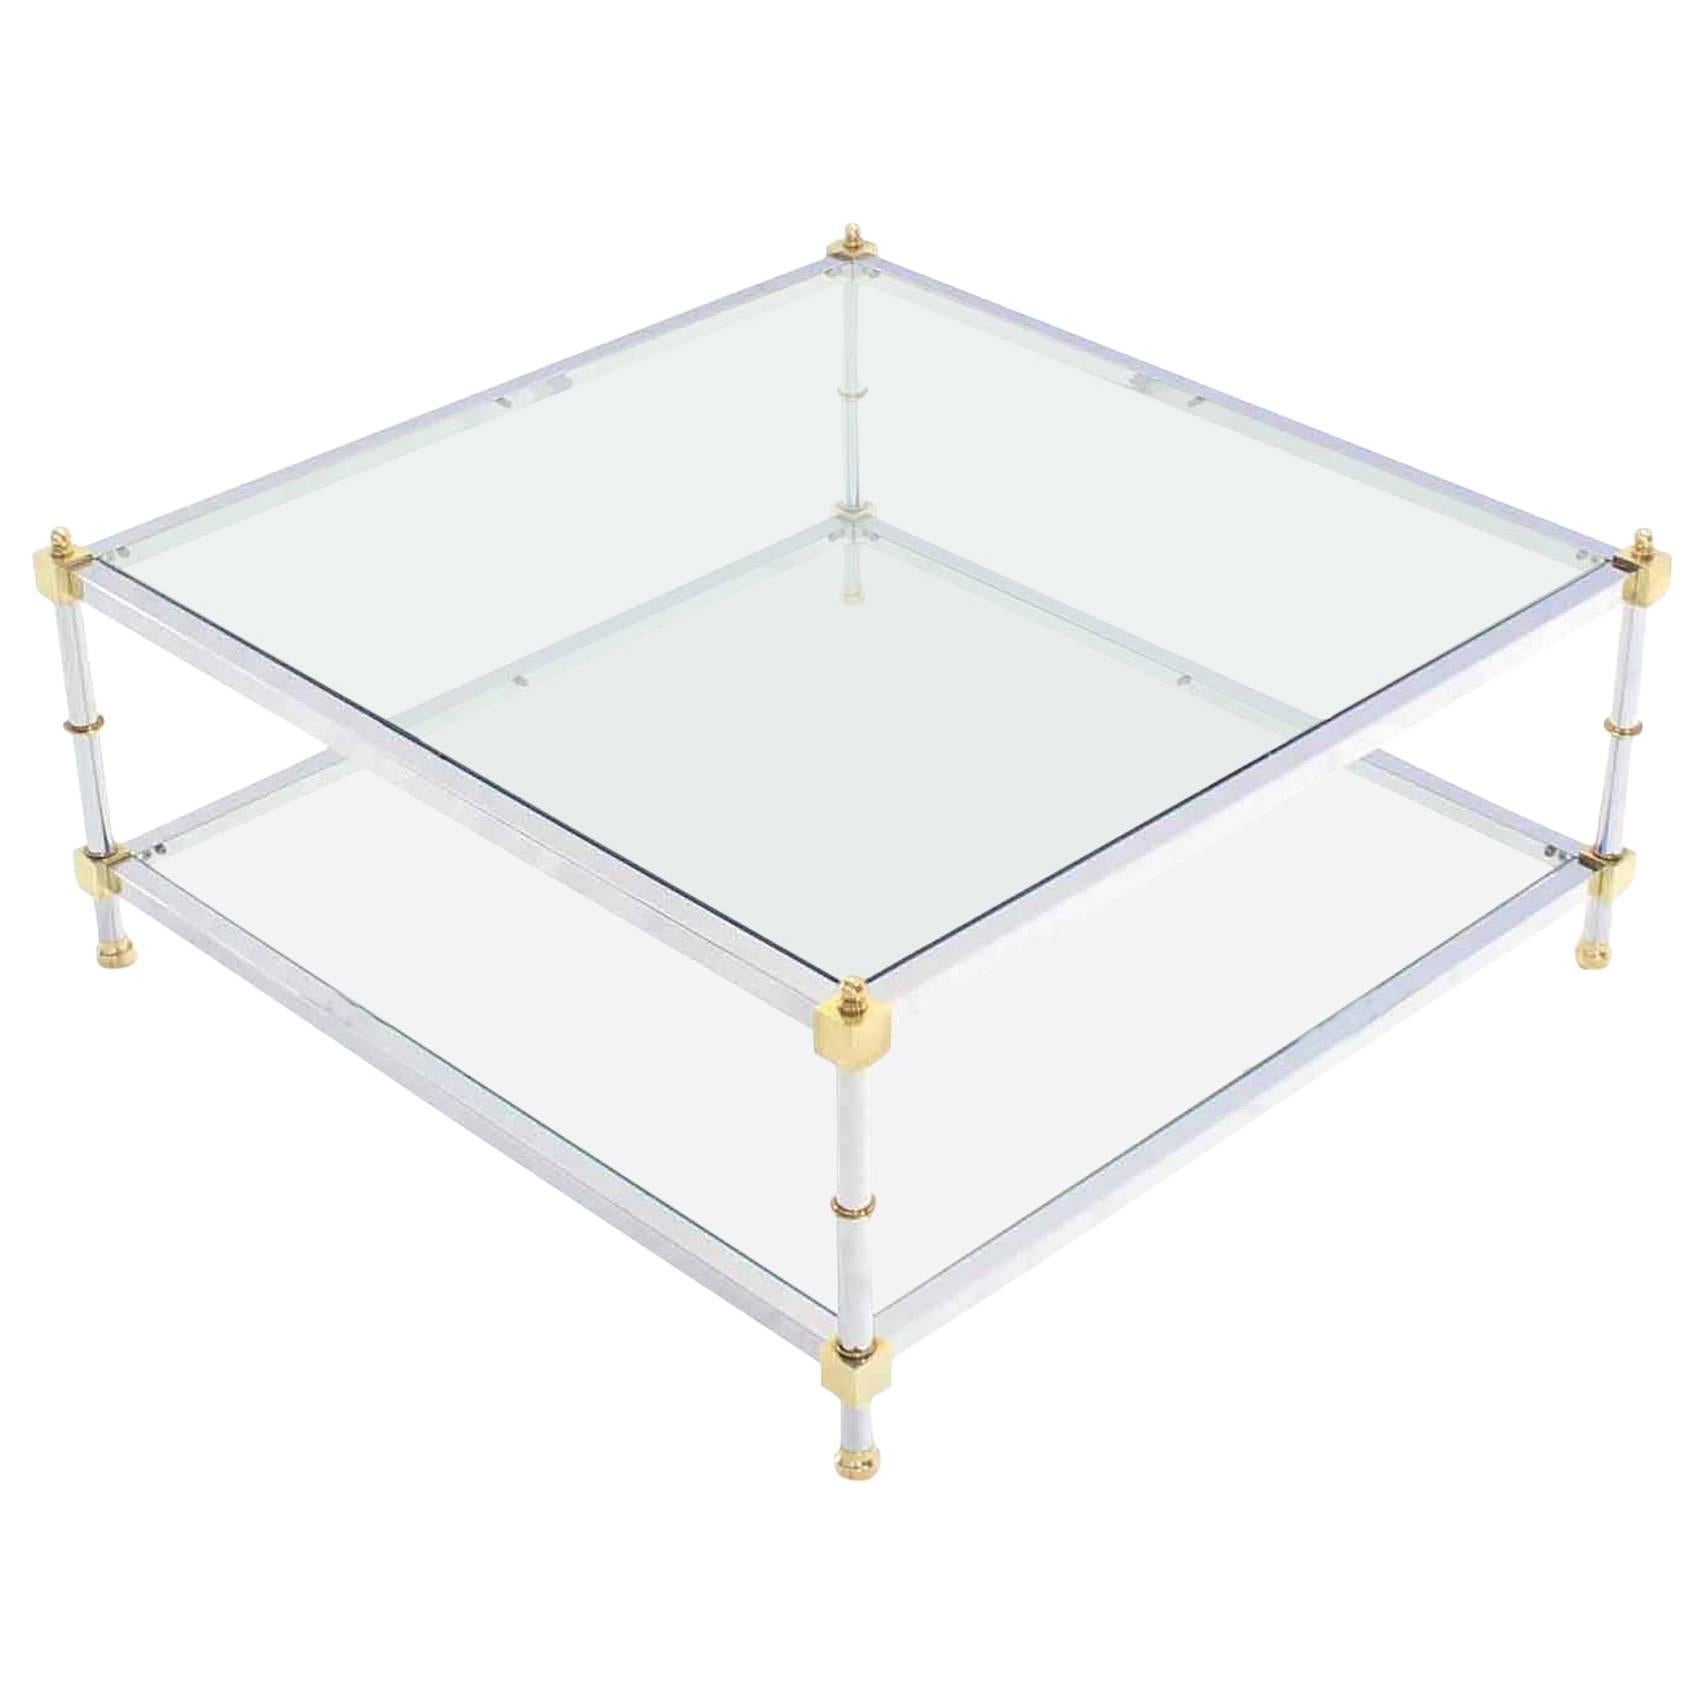 Large 37x37  Square 2 Tier Chrome Brass Glass top Coffee Table